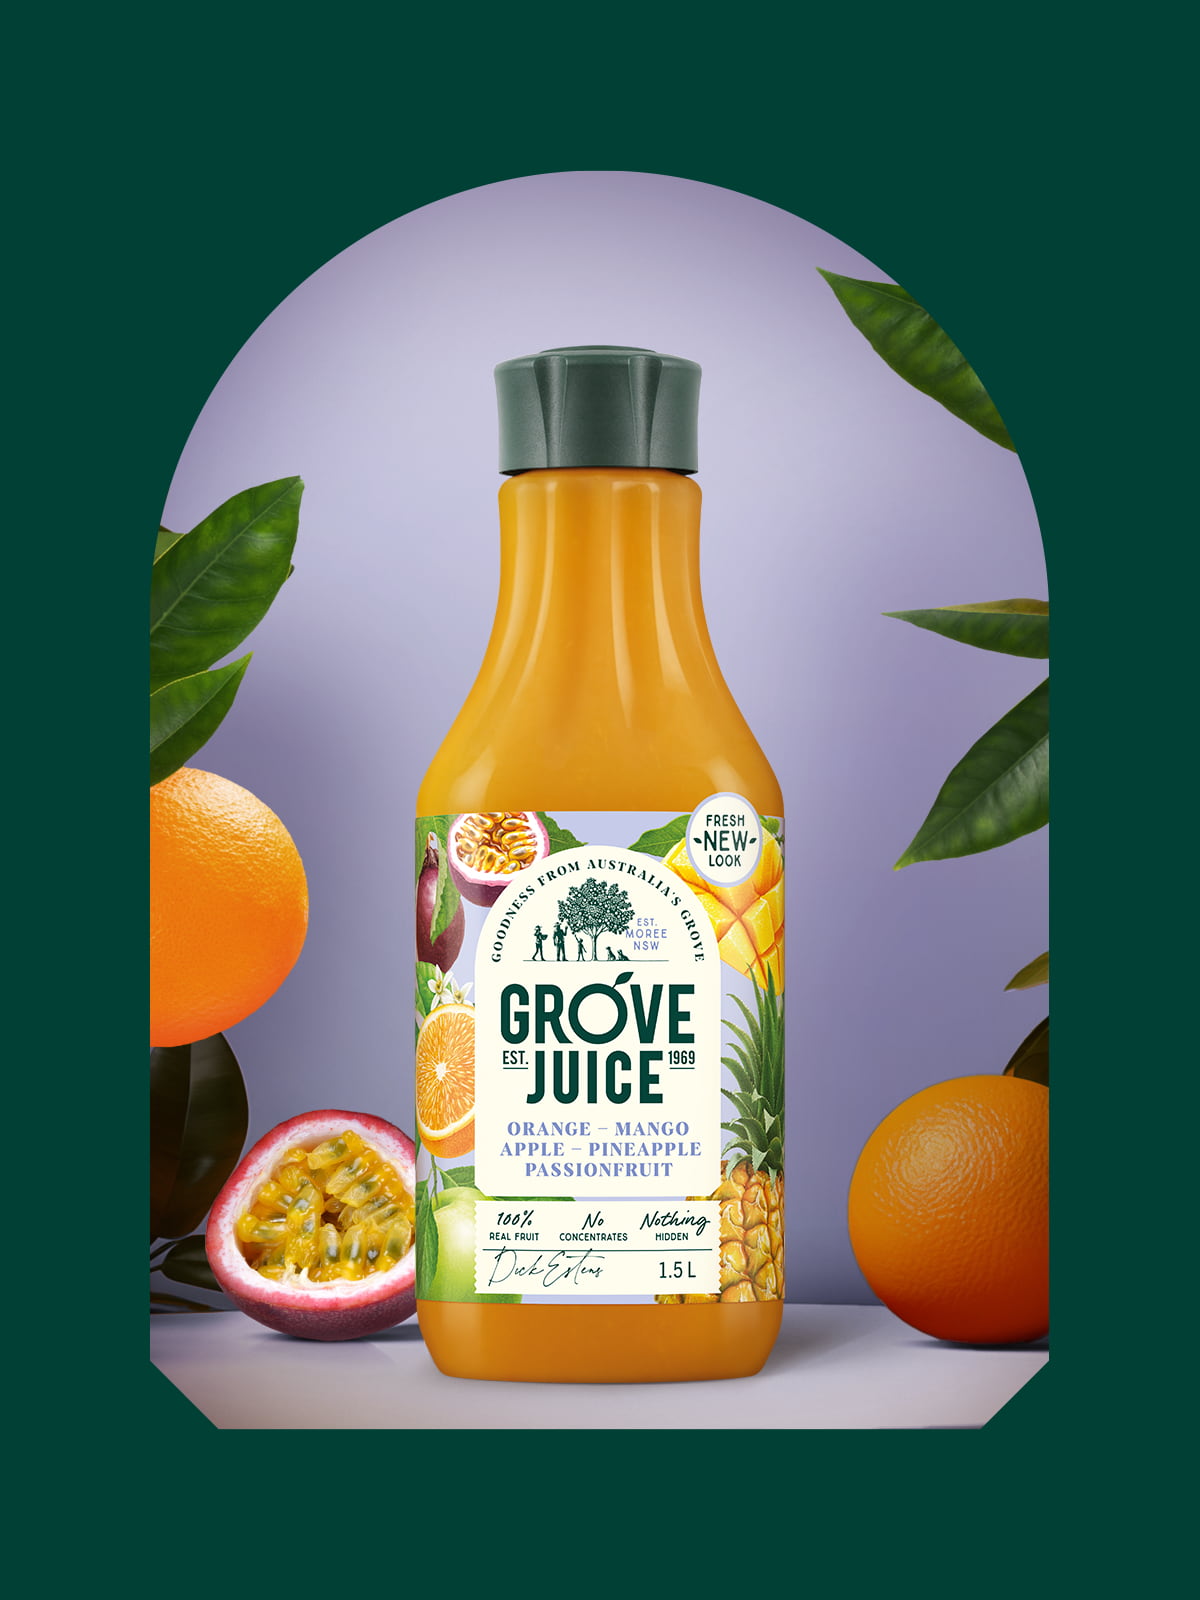 mixed-juice-vibrancy-bold-colours-grove-juice-handdrawn-fruit-modern-package-design-boxer-and-co-creative-studio-australia